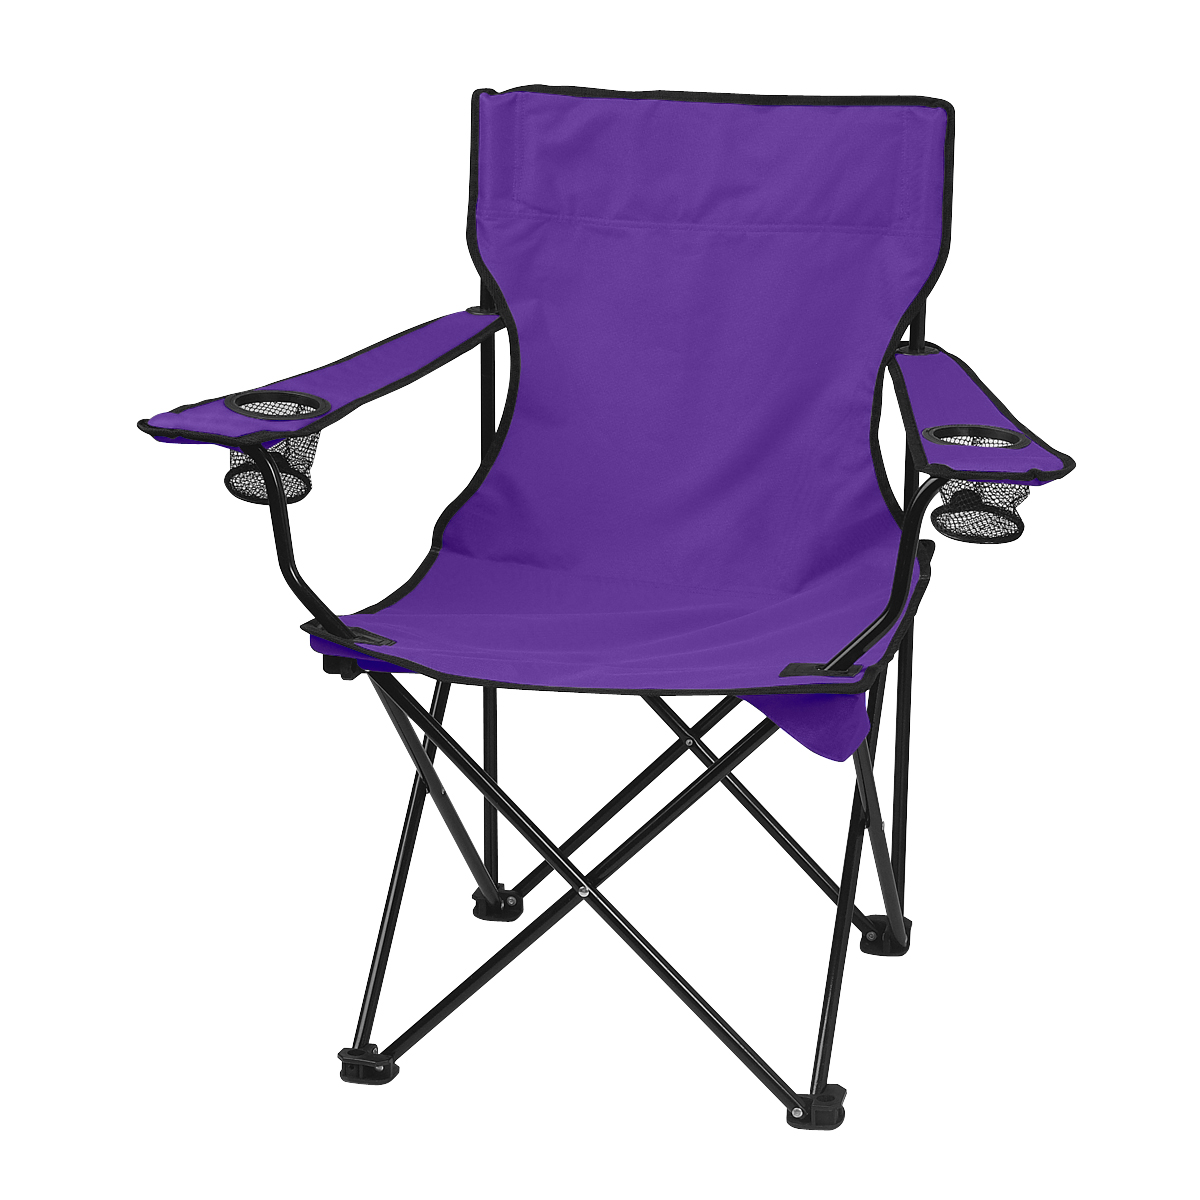 Printed Folding Chair With Carrying Bag